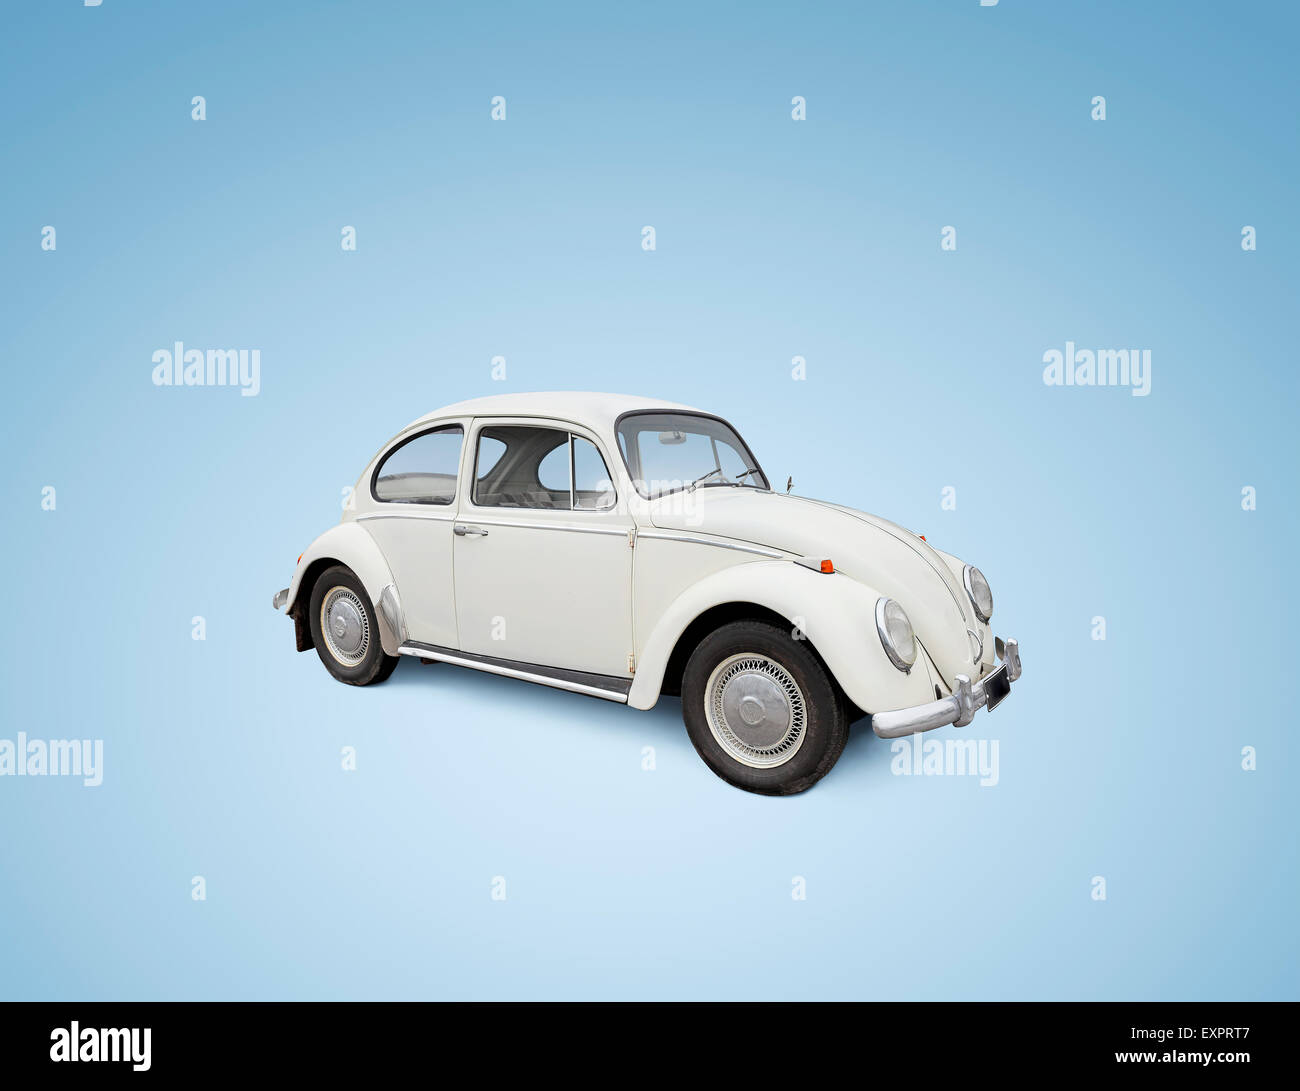 Vintage Volkswagen Beetle car isolated on blue background. Please not: the car is NOT in perfect condition. Stock Photo